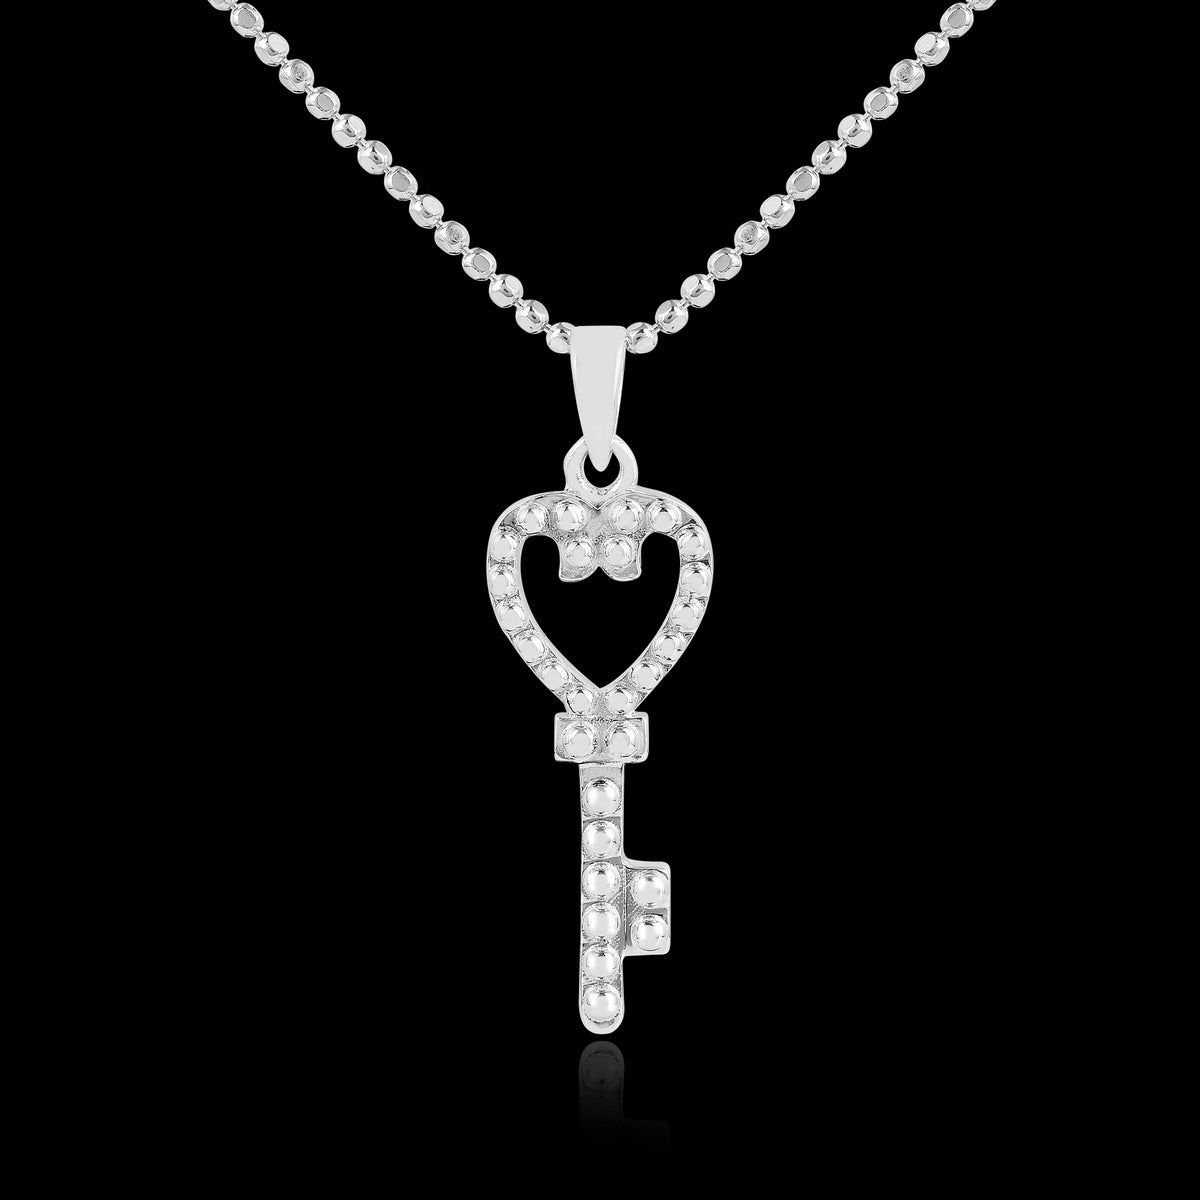 925 Sterling Silver Key Pendant with Ball Chain Gift for Her